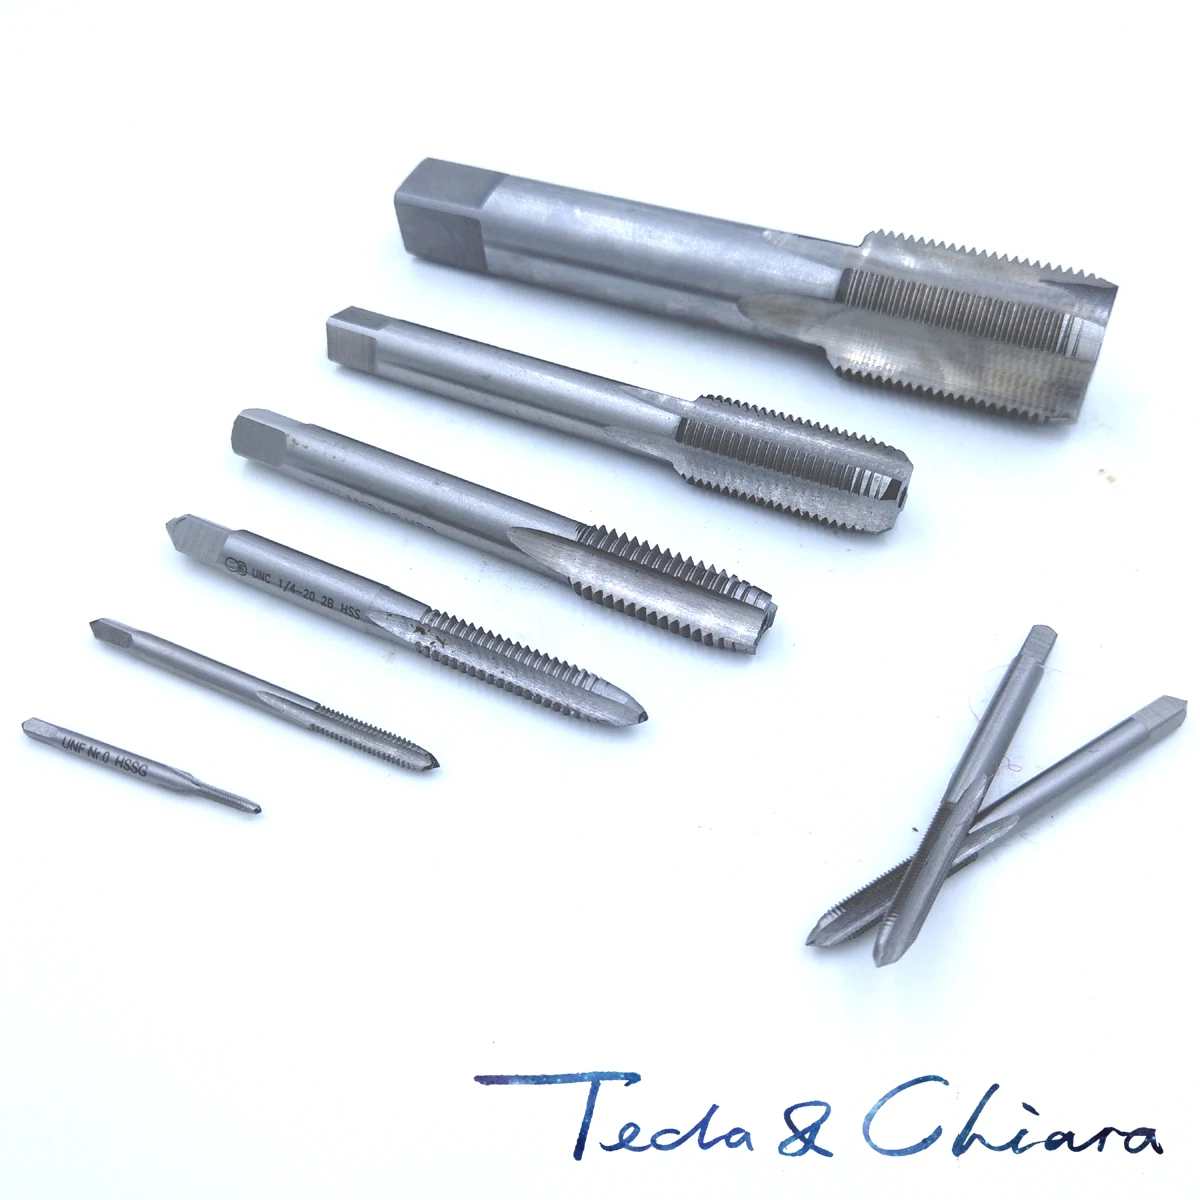 1-8 1-10 1-12 1-14 1-16 1-18 Unc Un Unf Uns Unef Hss Right Hand Tap Tpi  Threading Tools Mold Machining 1